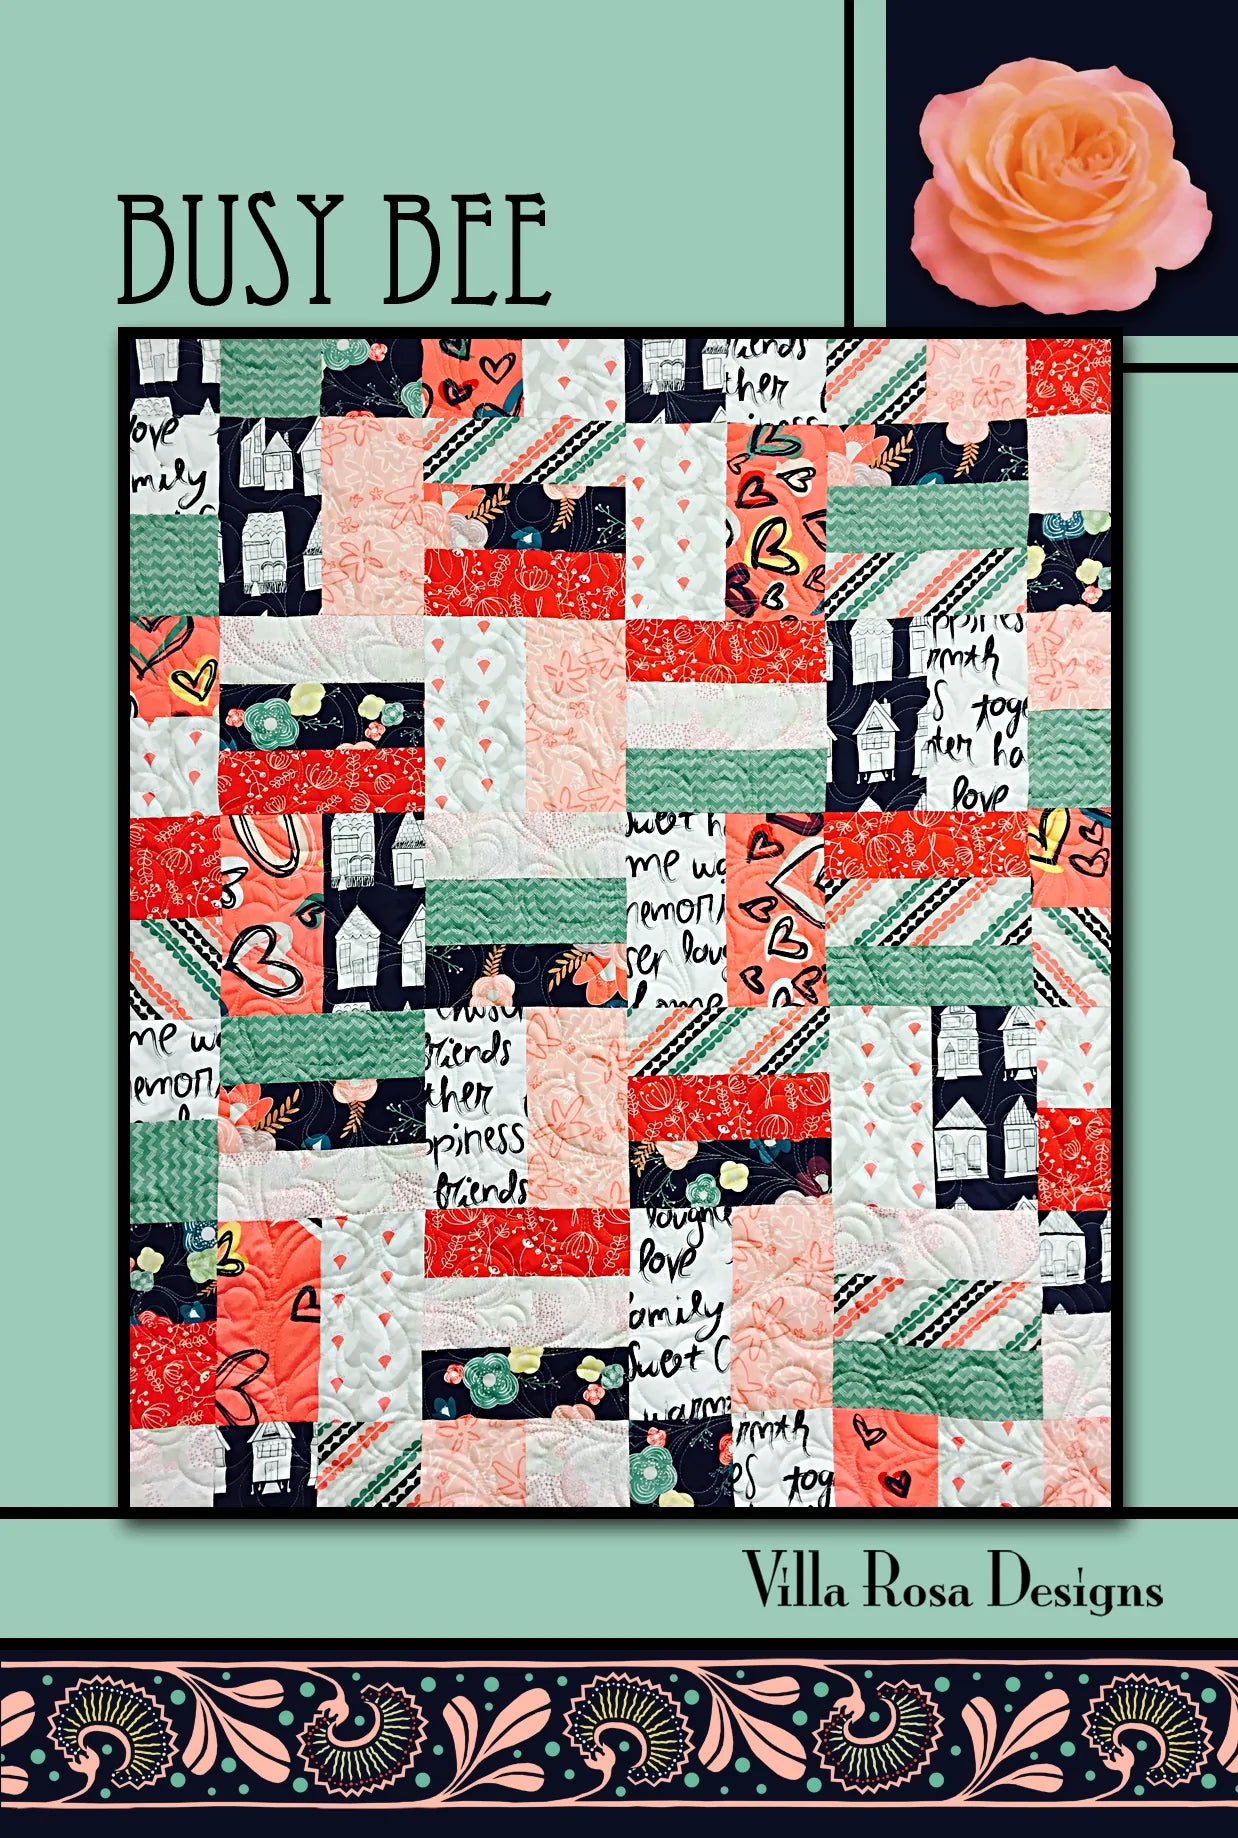 BUSY BEE QUILT PATTERN from Villa Rosa Designs, Toad Hollow Fabrics